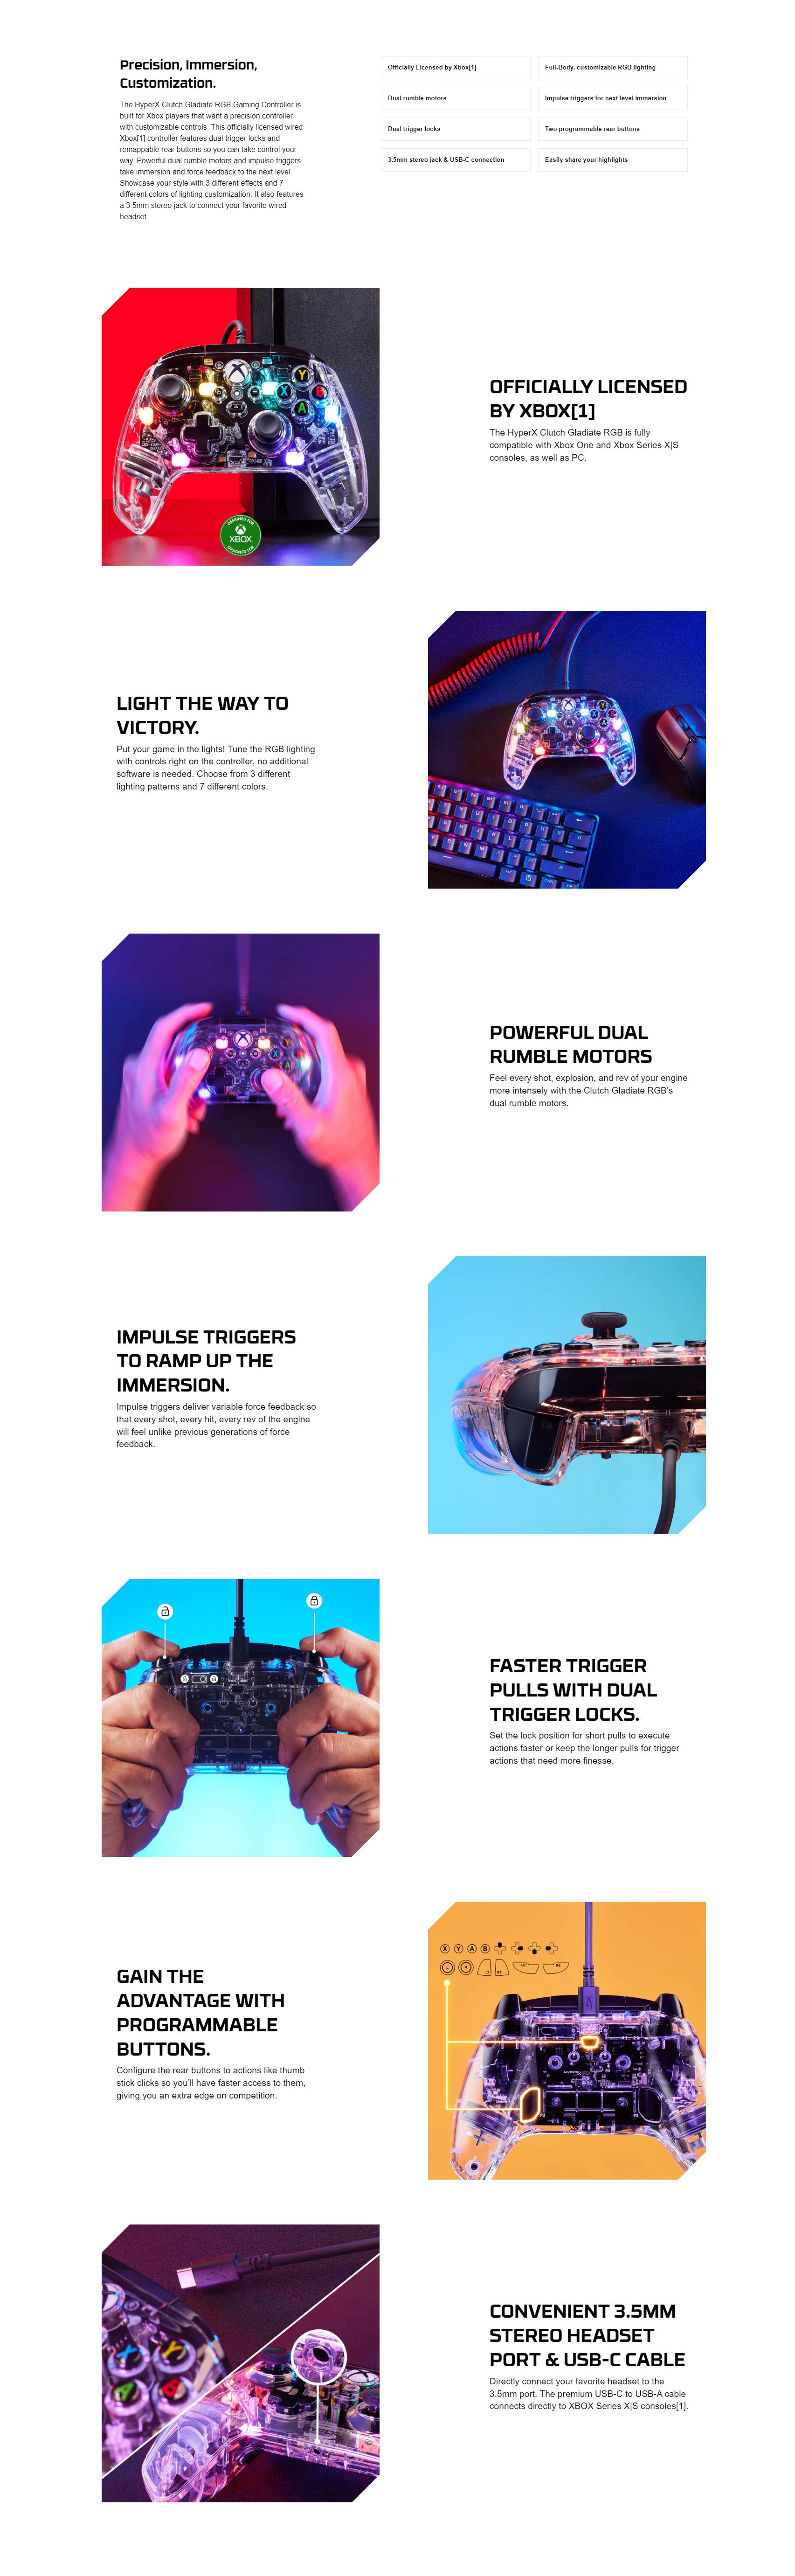 A large marketing image providing additional information about the product HyperX Clutch Gladiate - RGB Gaming Controller for Xbox & PC - Additional alt info not provided